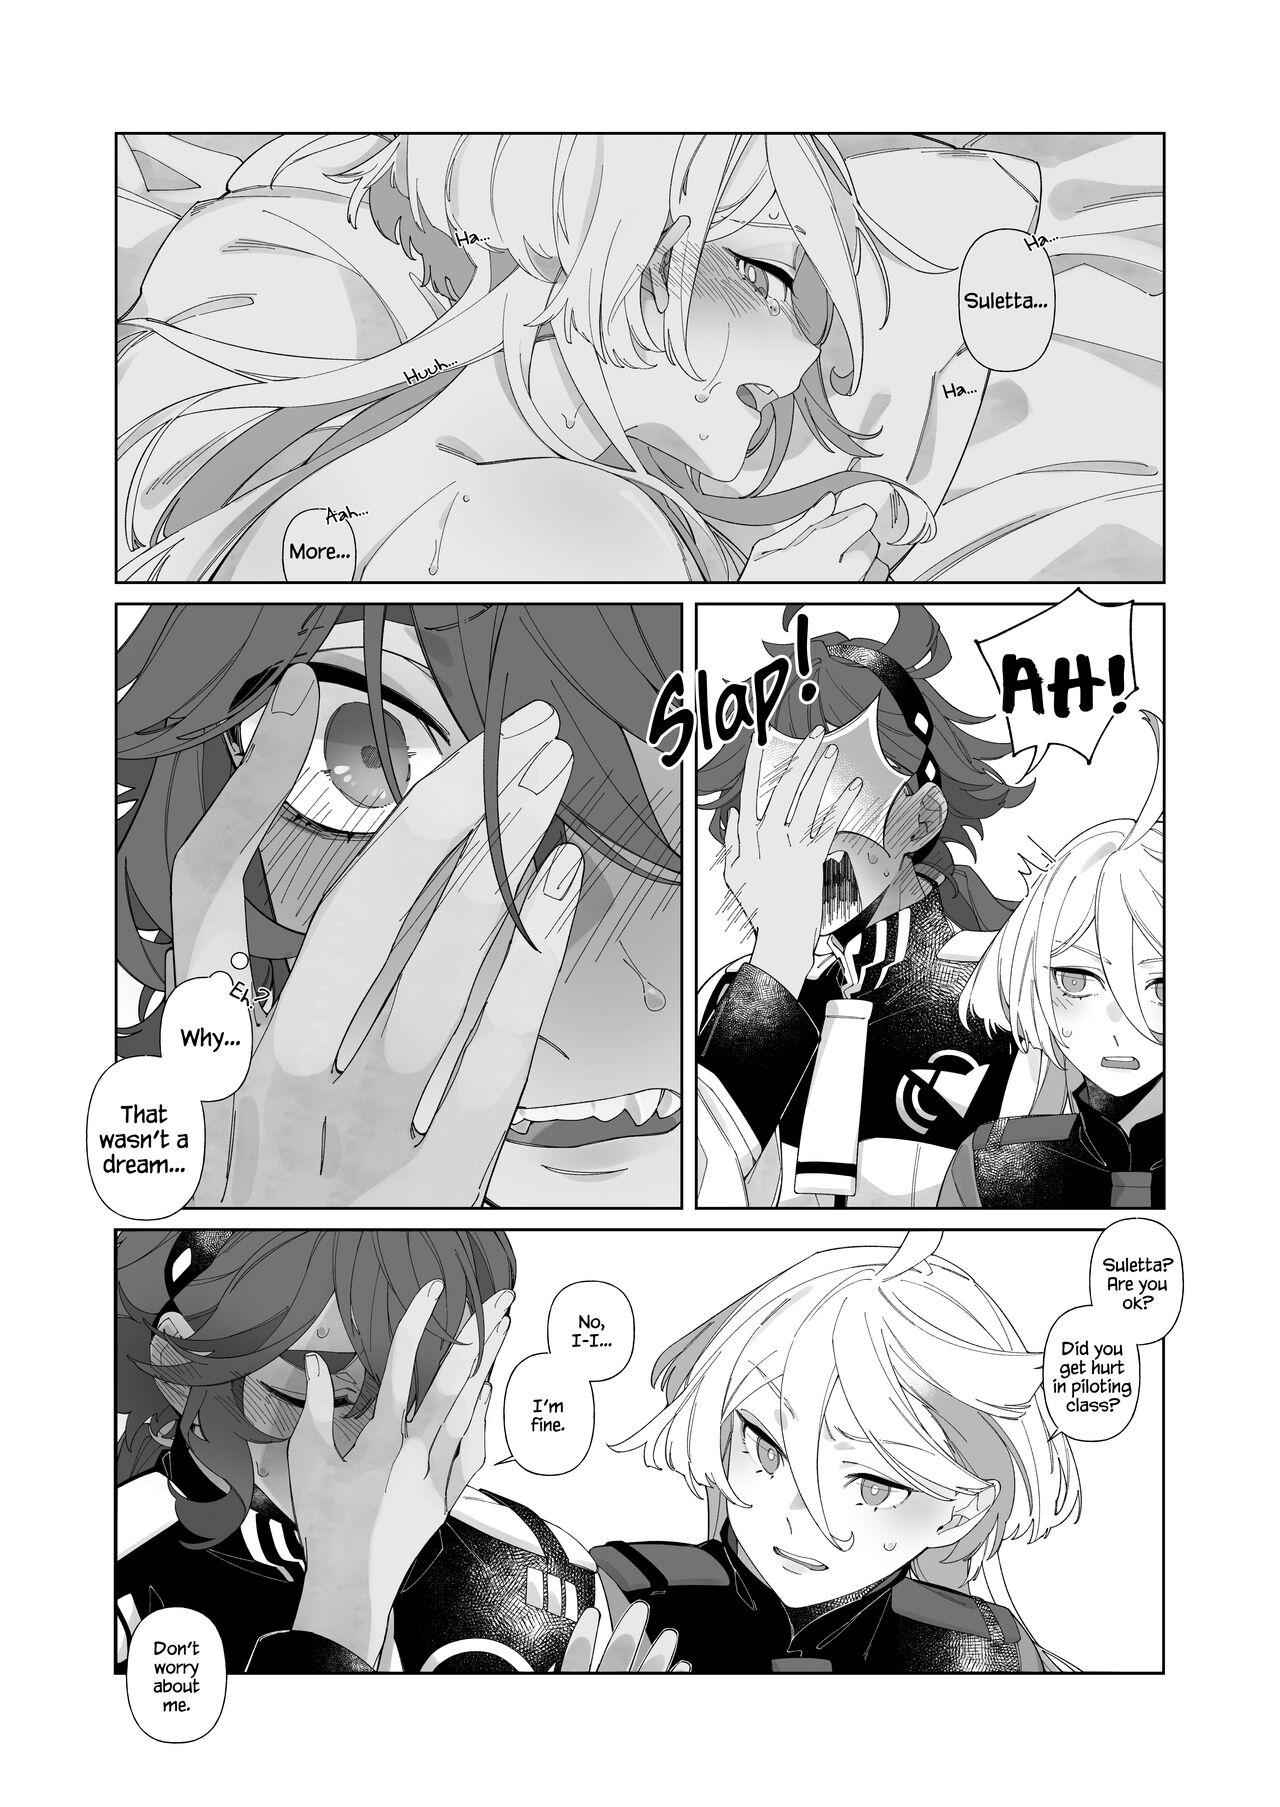 Bubblebutt Spring Dreams - Mobile suit gundam the witch from mercury Asia - Page 10